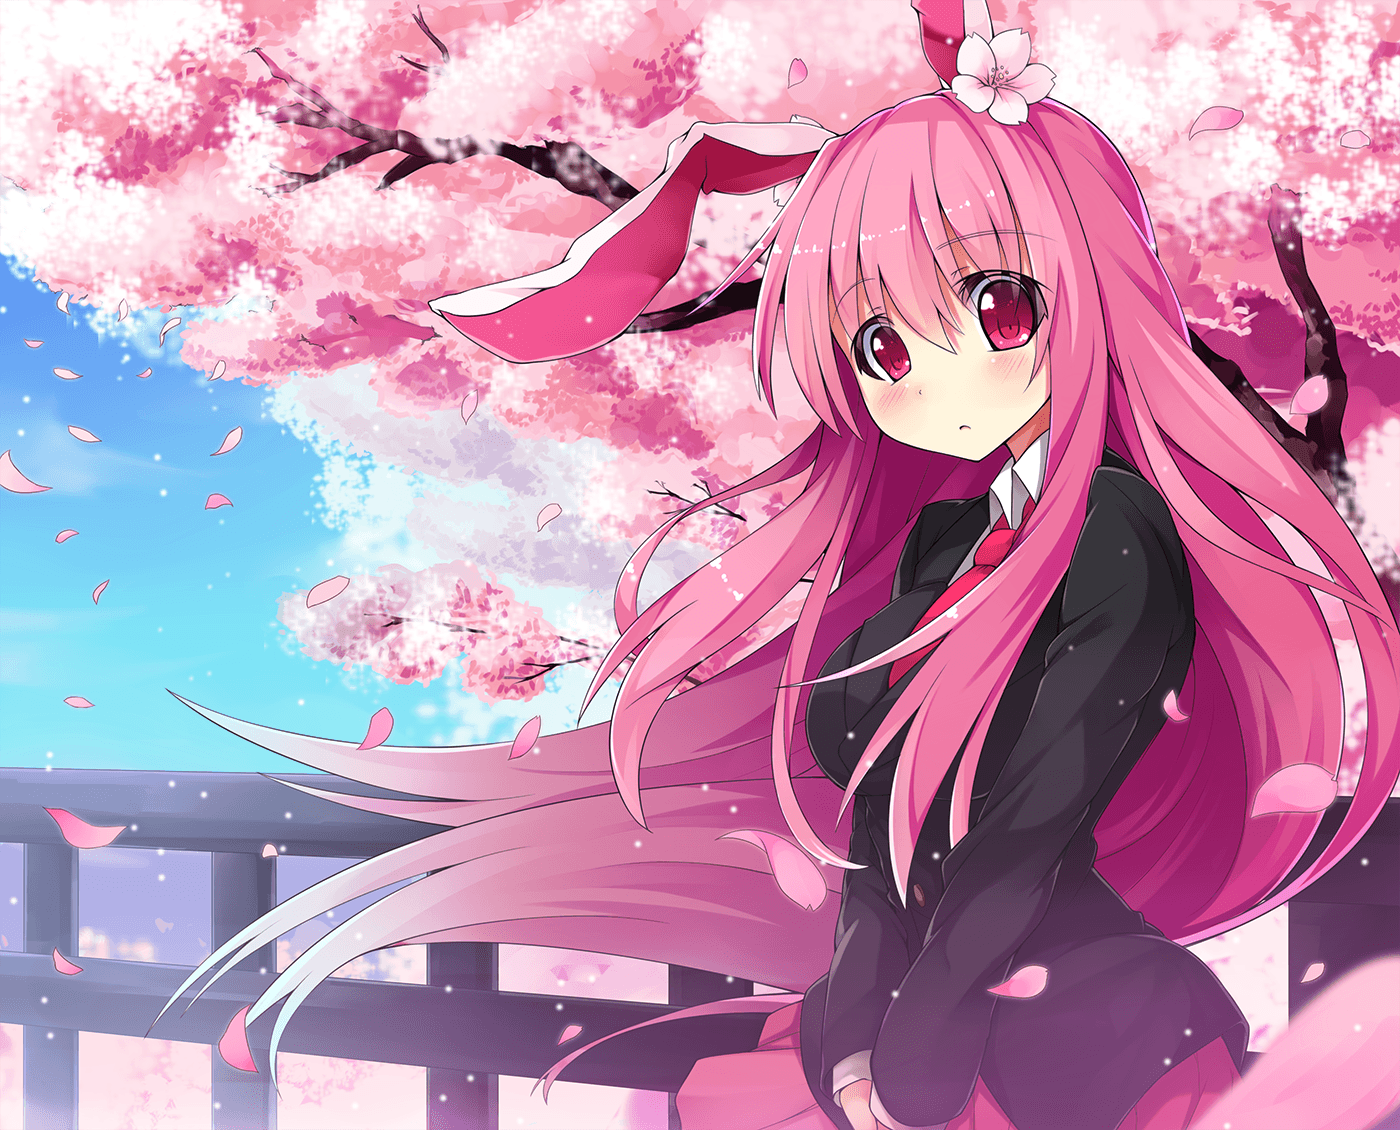 Pretty Anime Girl Wallpapers - Top Free Pretty Anime Girl Backgrounds